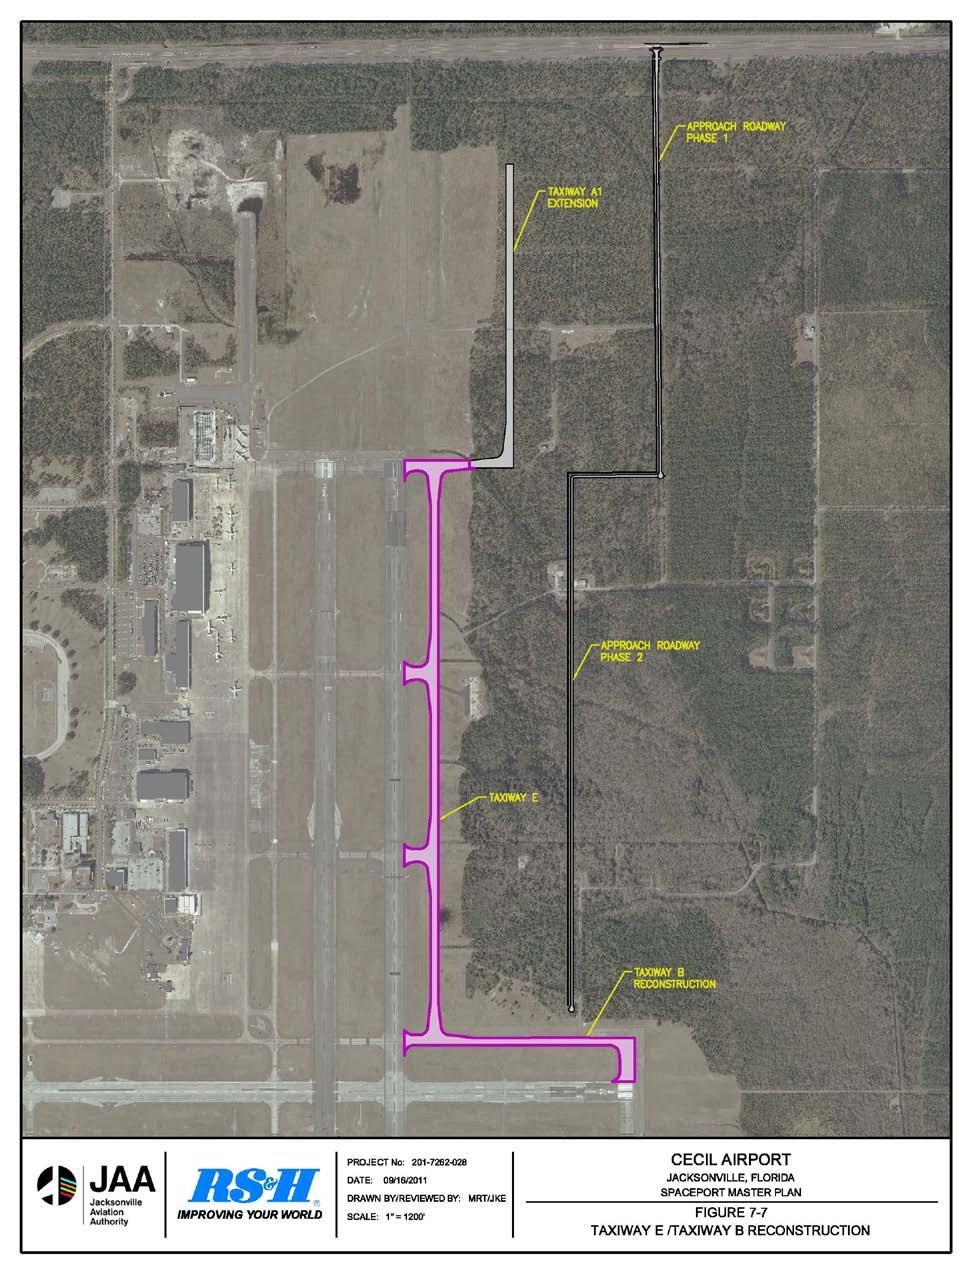 Figure 7-7 Taxiway E Construction/Taxiway